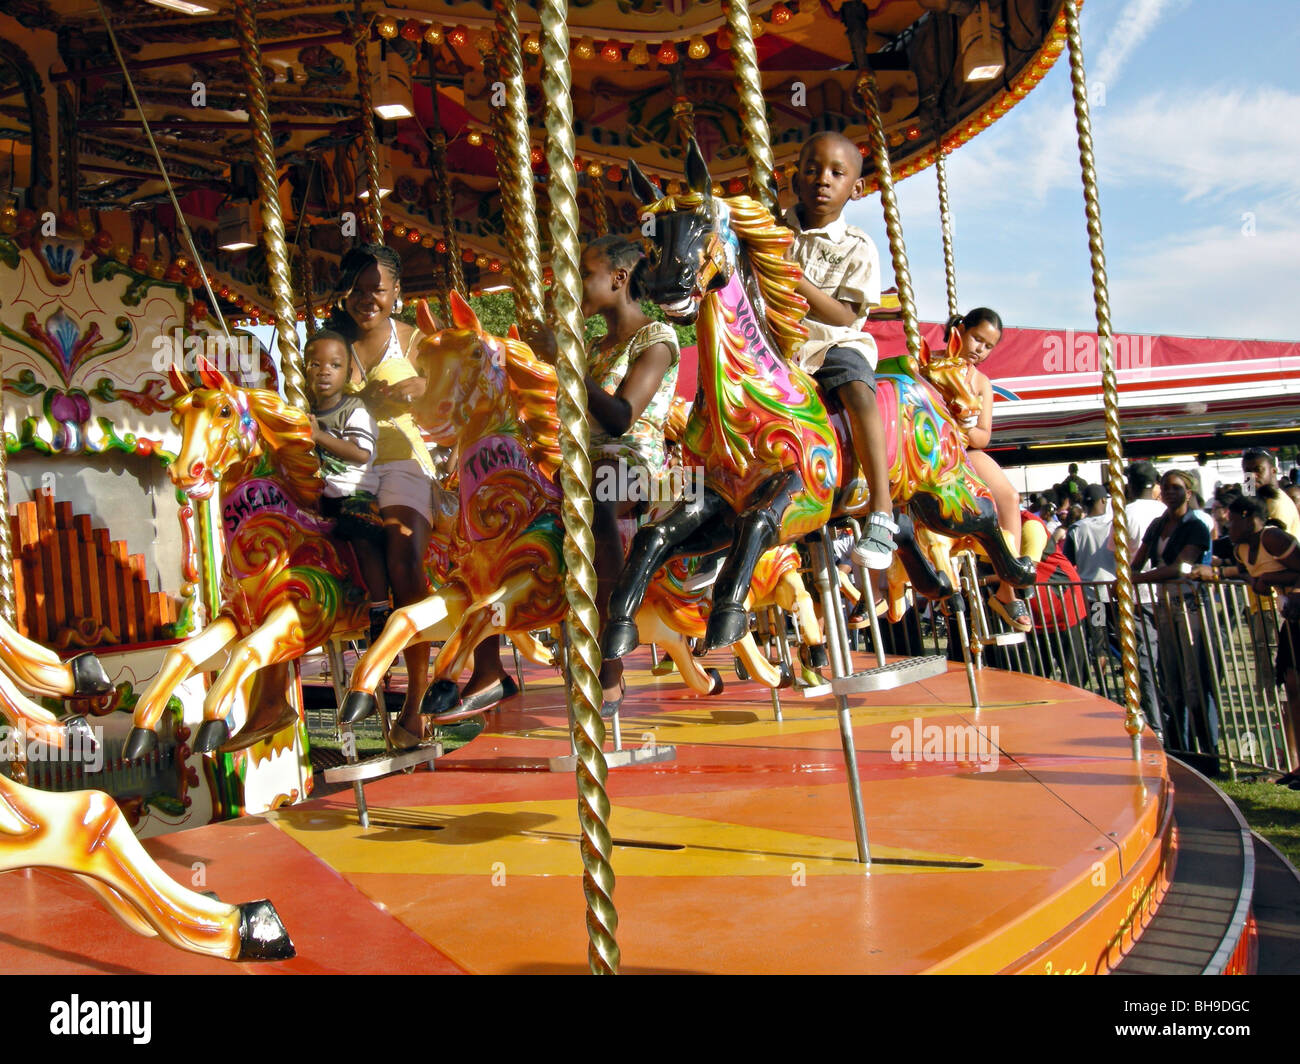 UK Afro caribbean Children riding toy horses at a funfair in south London Stock Photo